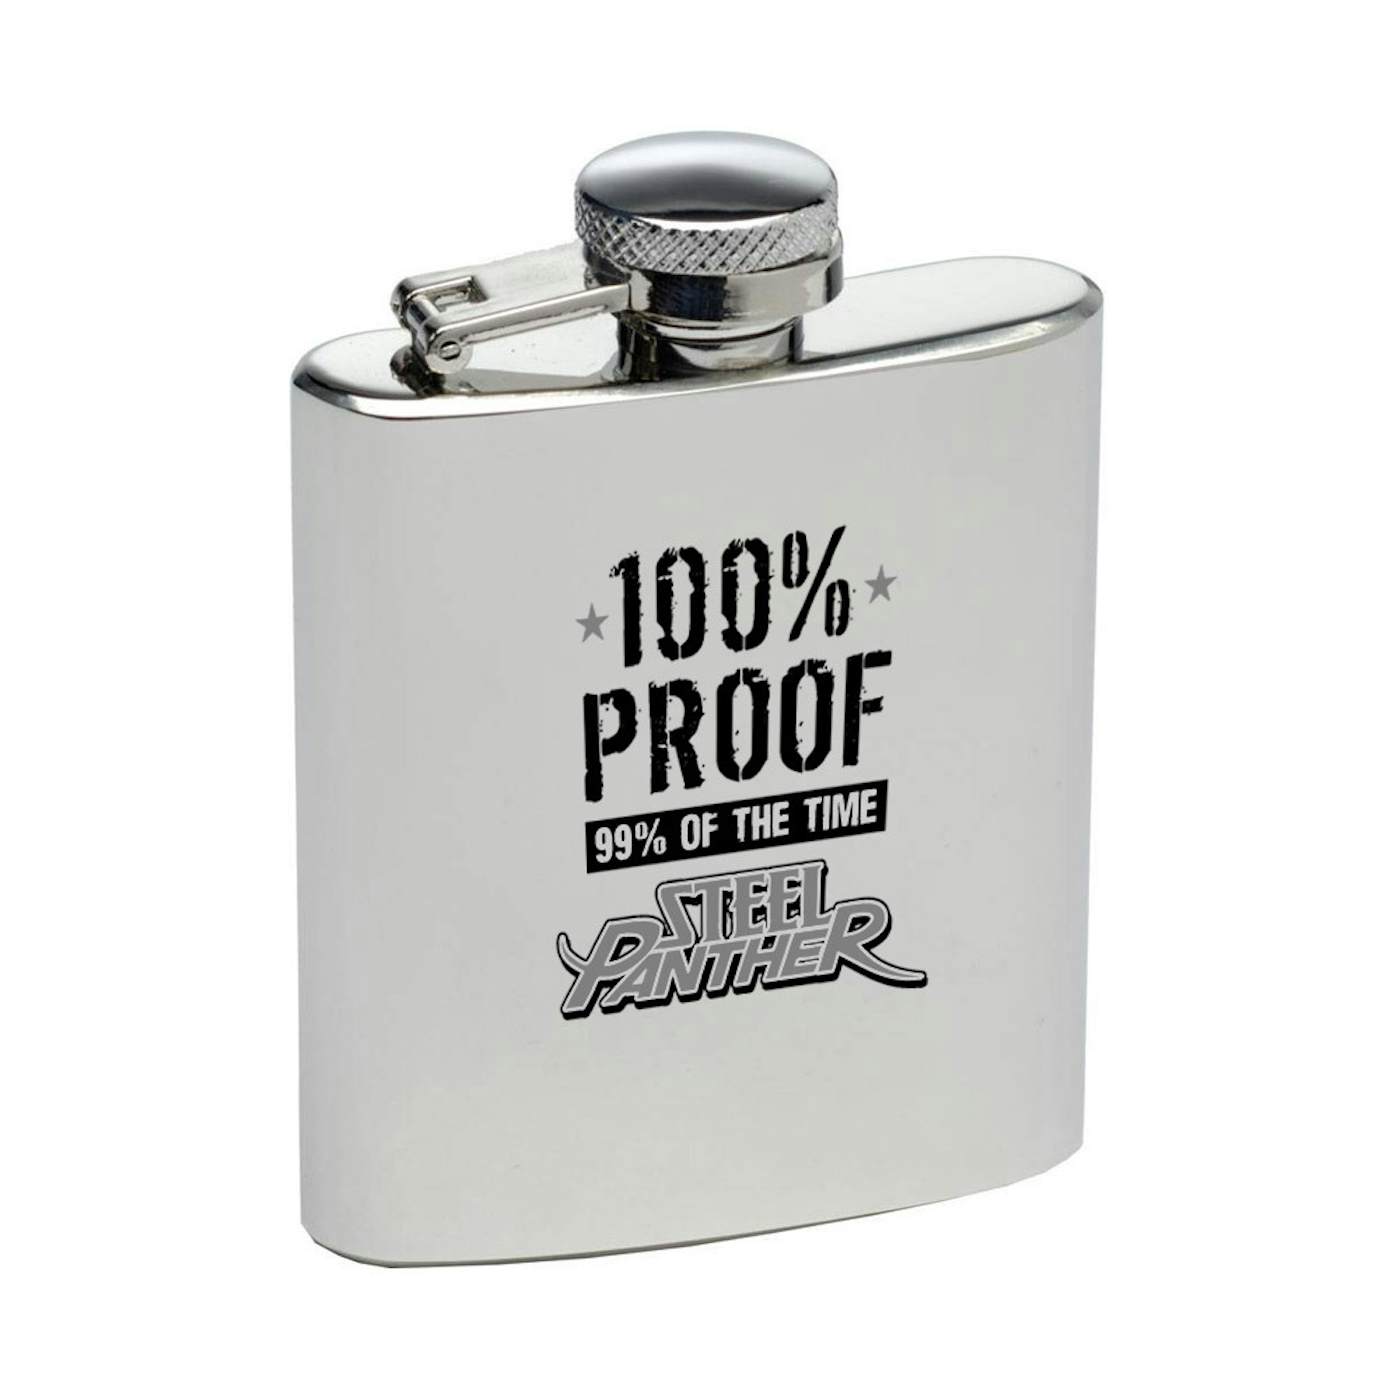 Steel Panther Flask